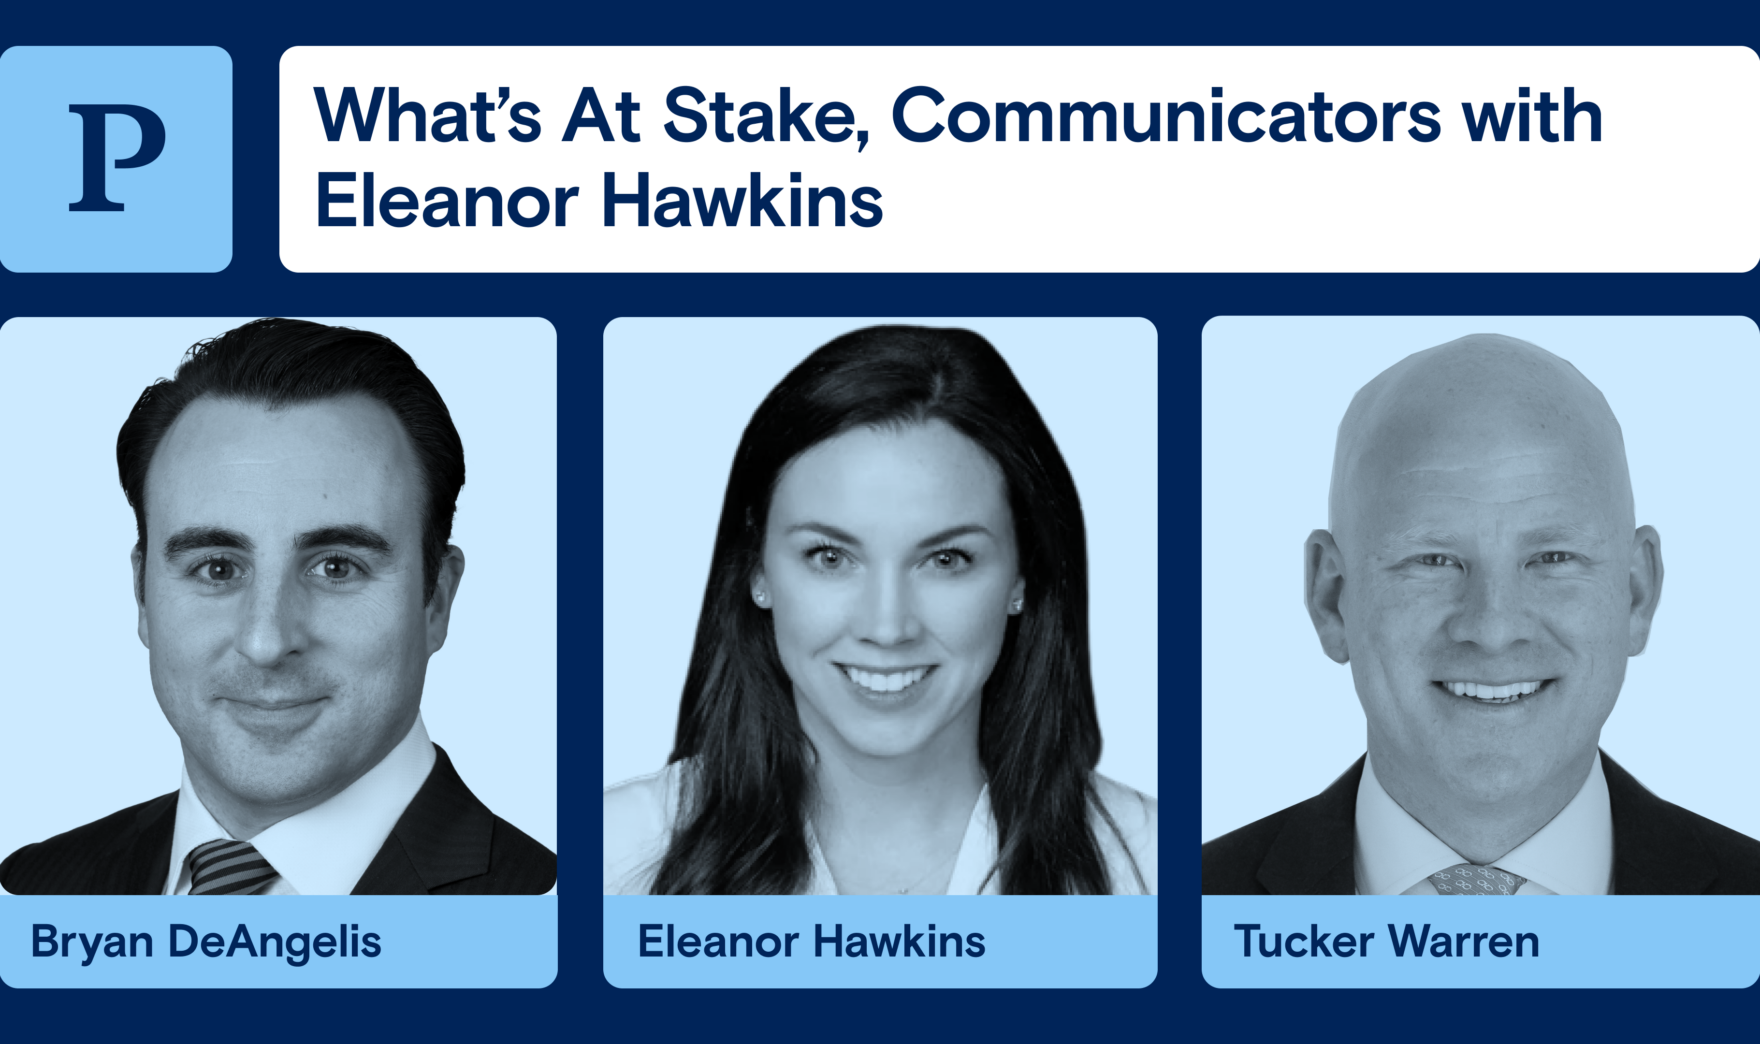 What’s At Stake, Communicators with Eleanor Hawkins